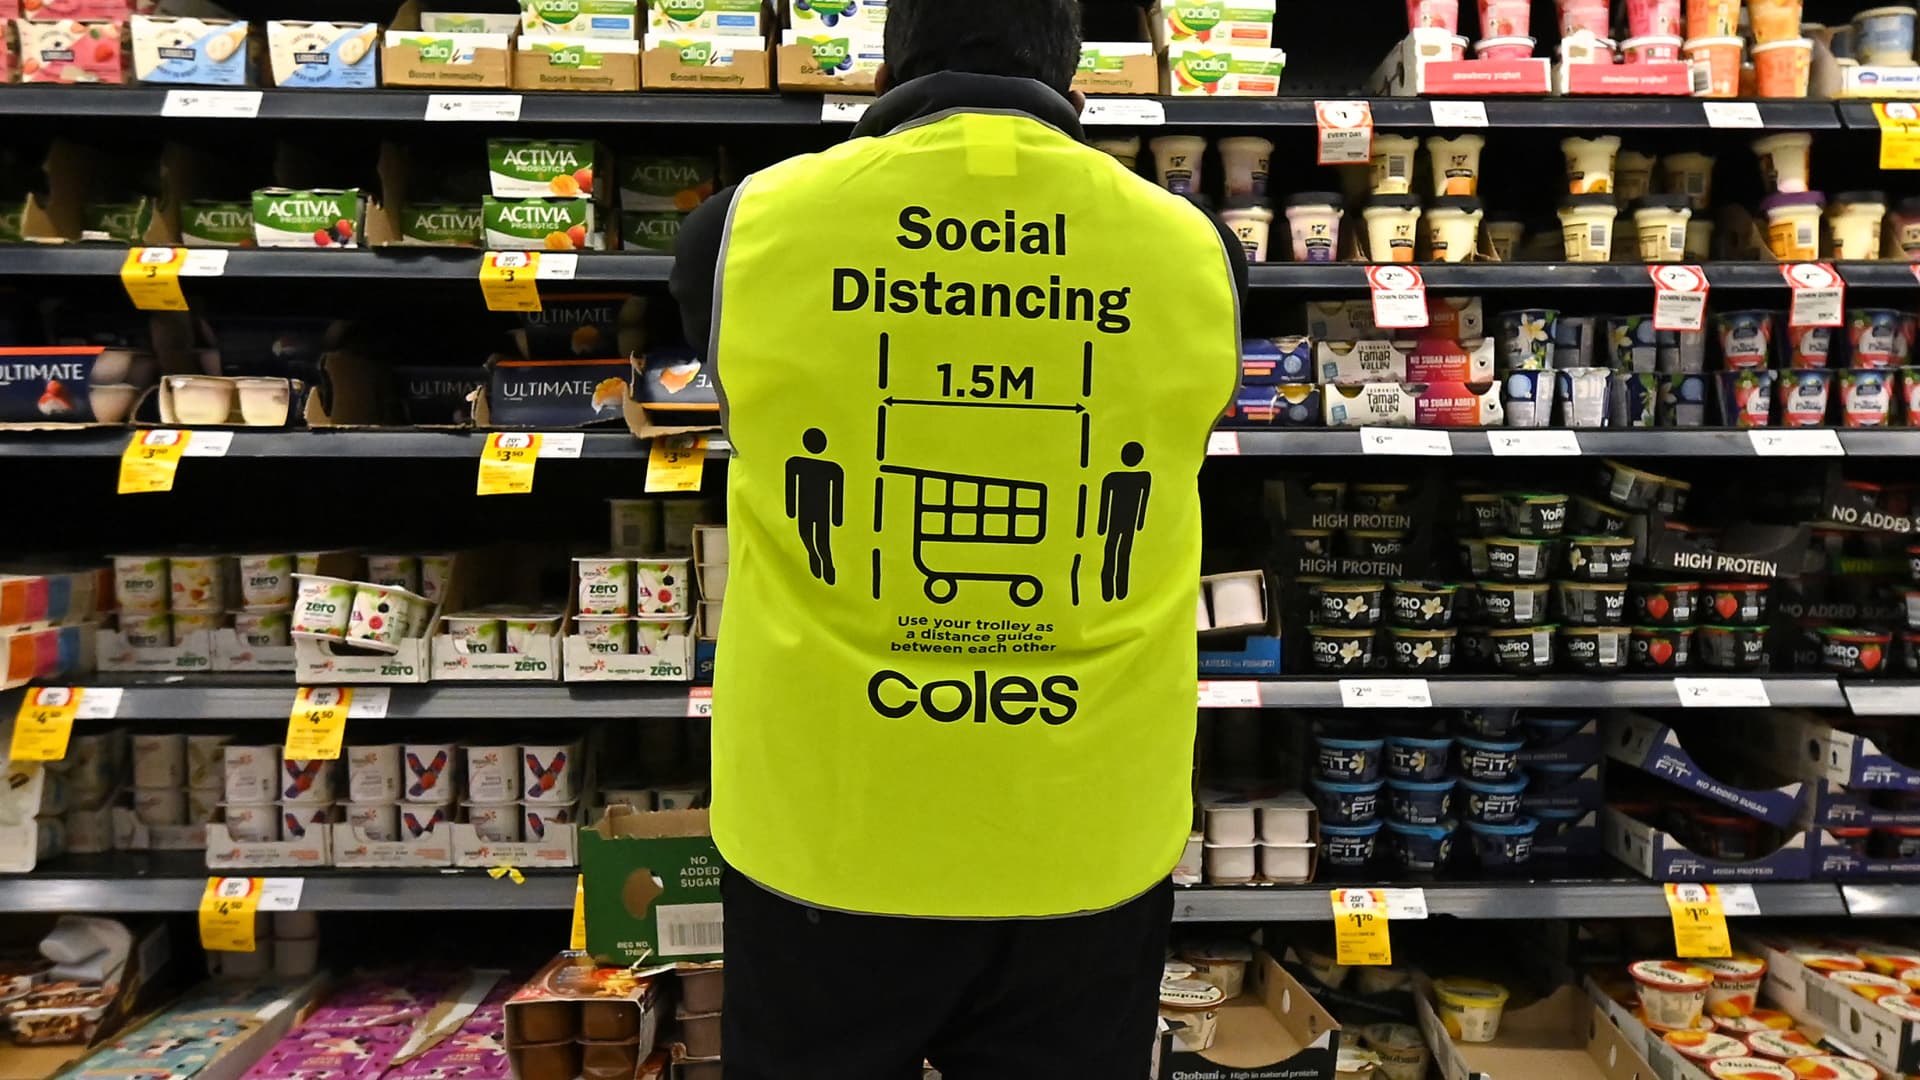 Worker and supply shortages caused major supermarkets in Australia to reinstate purchase limits on toilet paper, meat products and medicines.